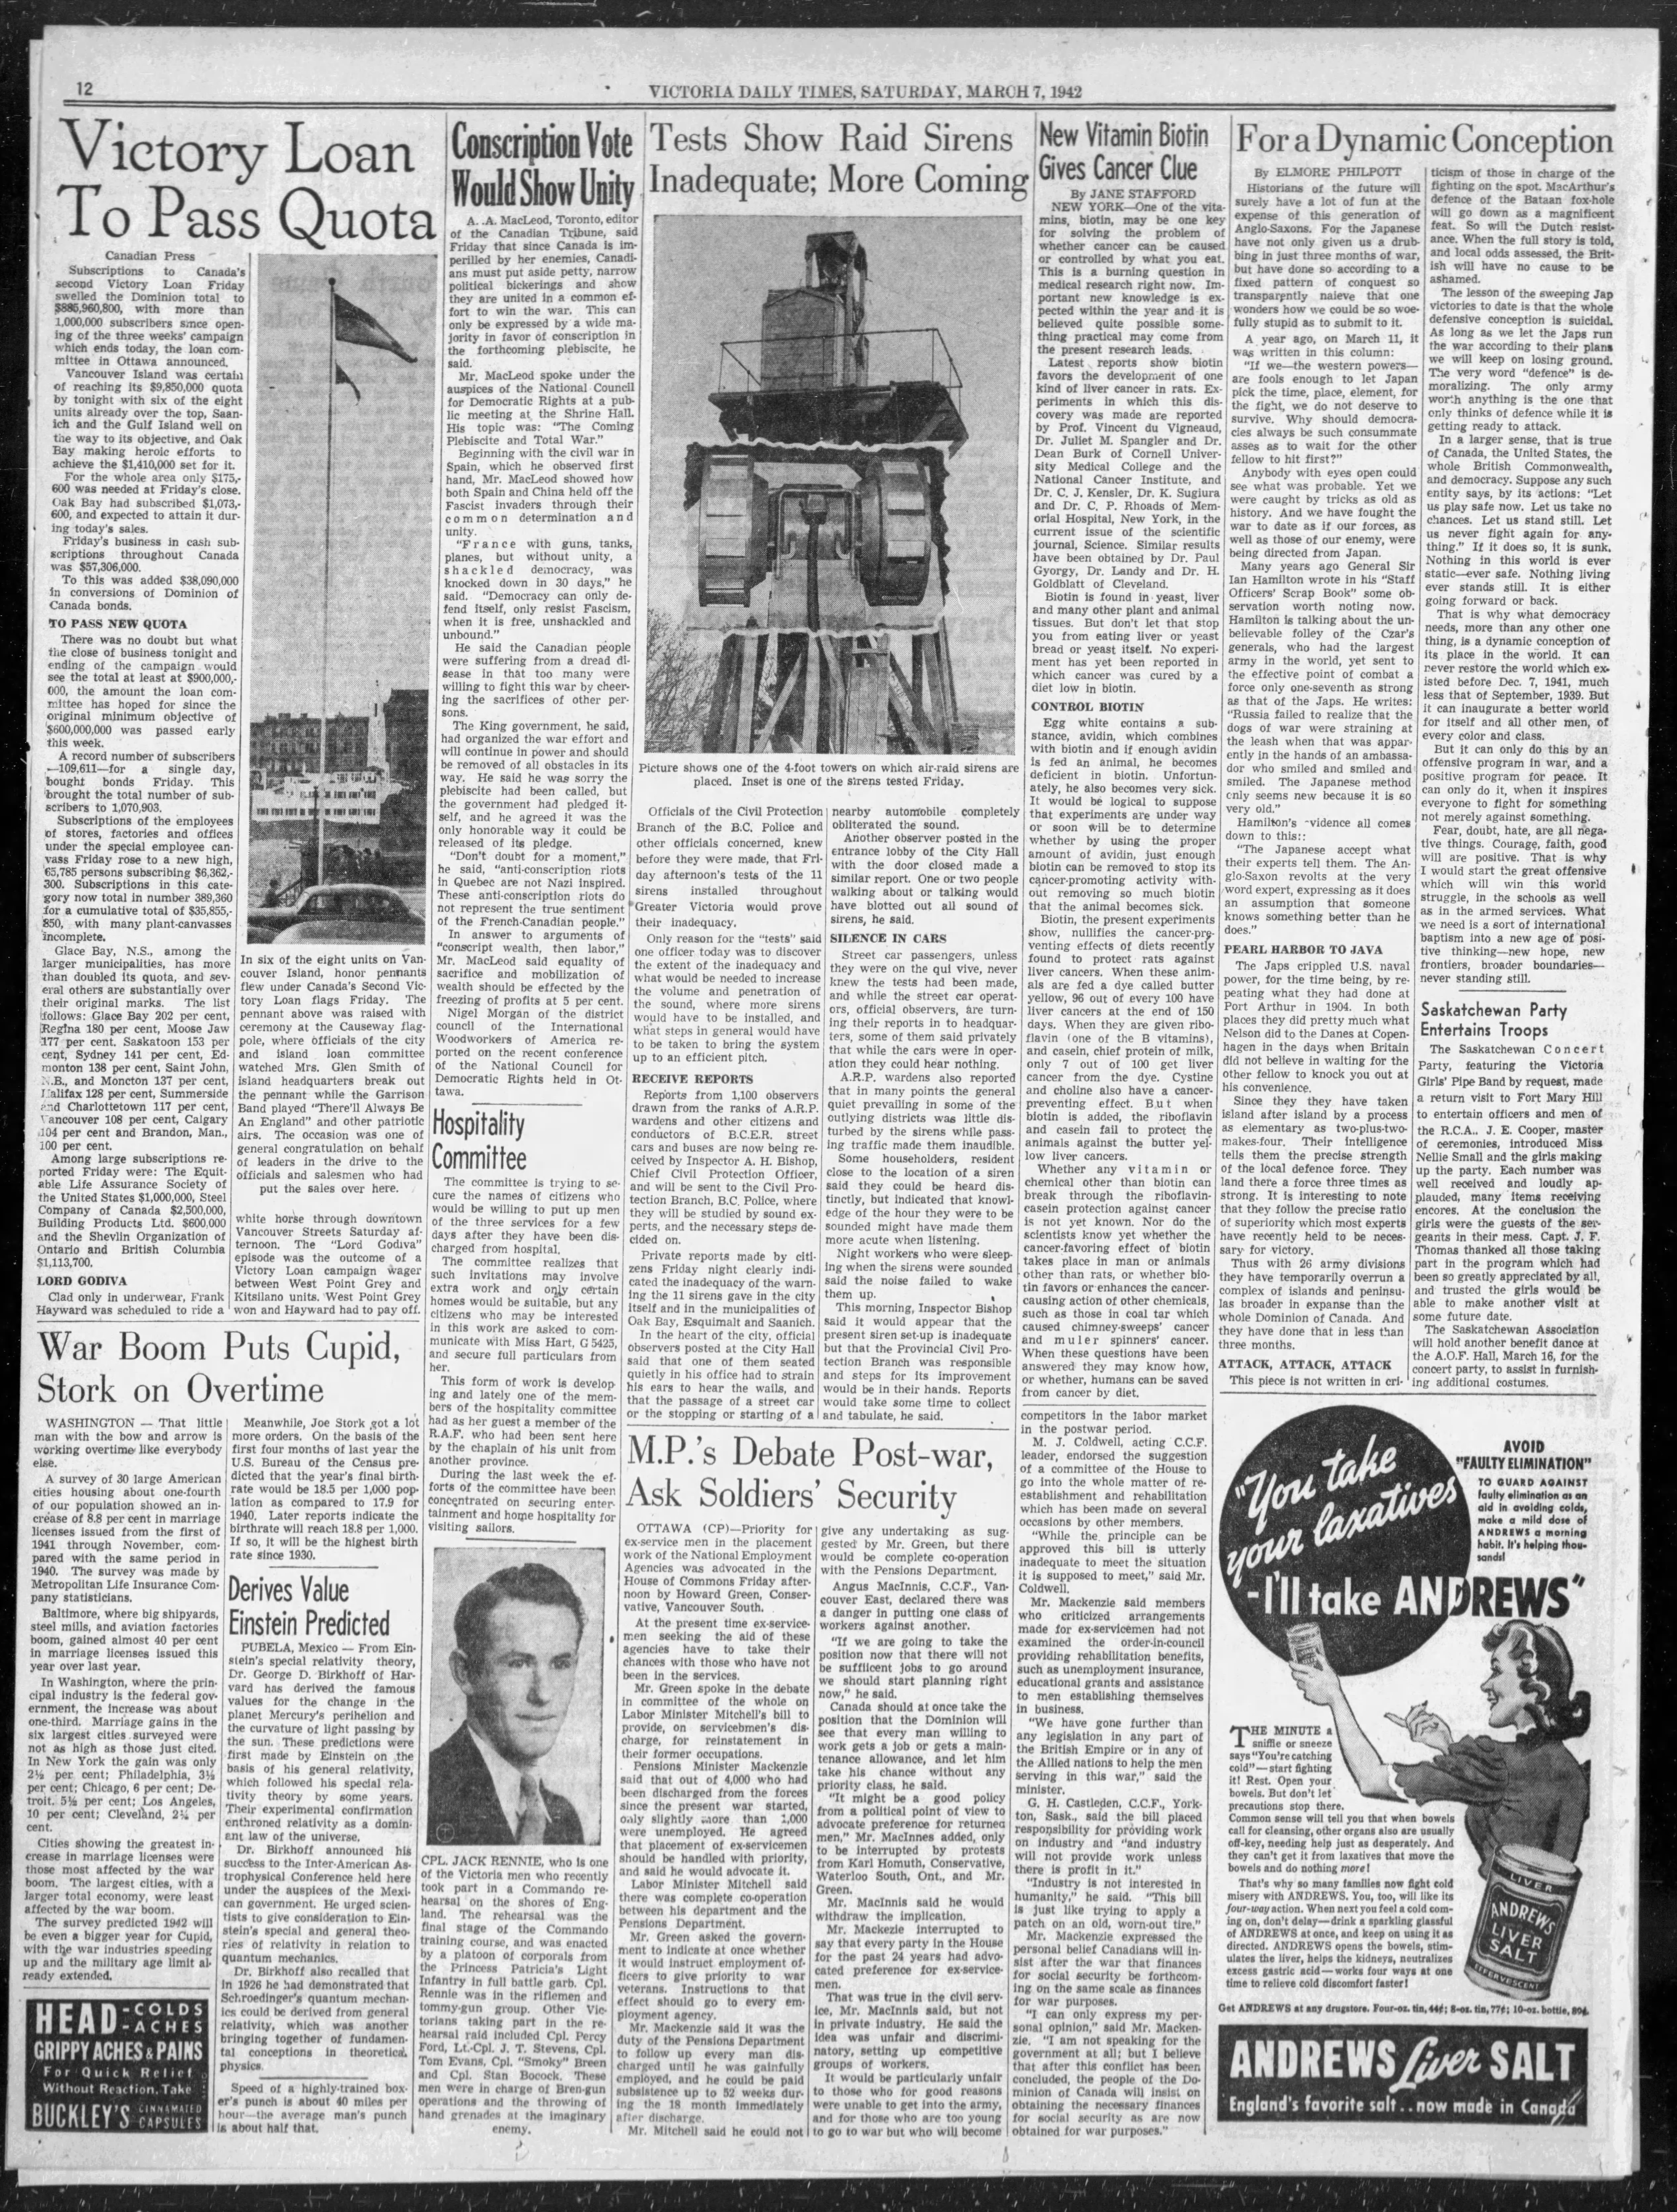 The_Victoria_Daily_Times_Sat__Mar_7__1942_.jpg